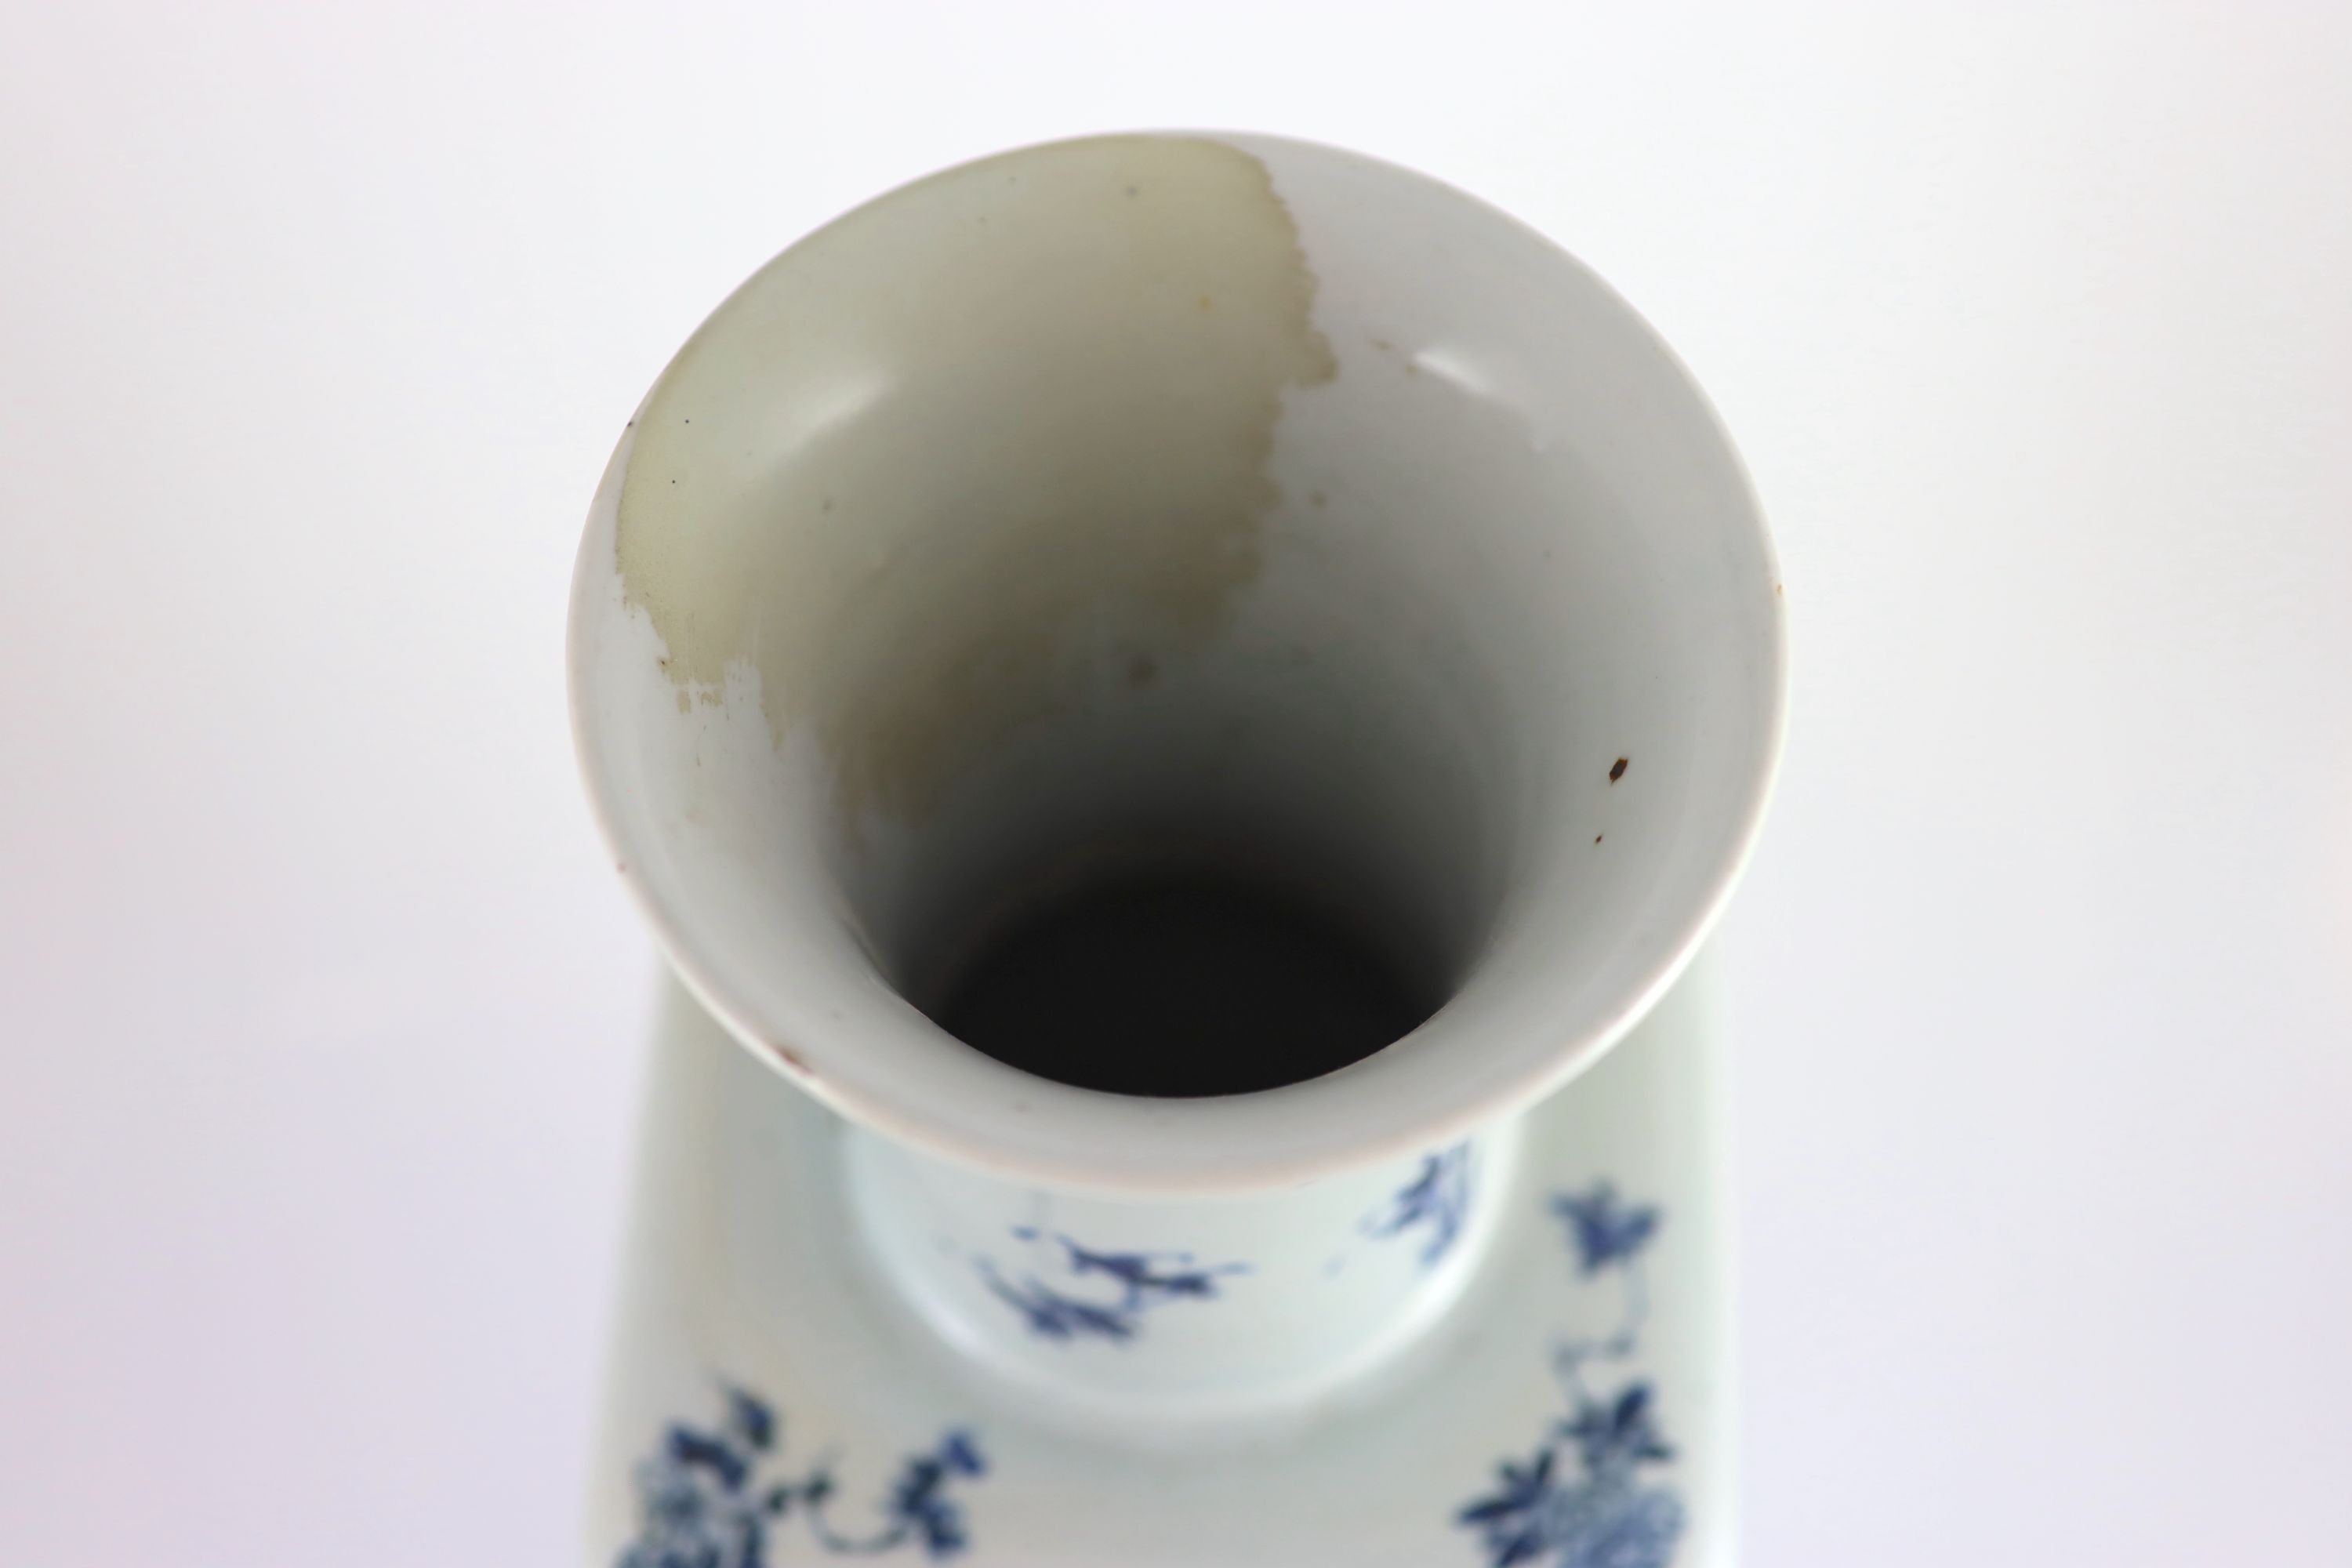 A large Chinese blue and white inscribed vase, late 19th/early 20th century, 49.5cm high, some restoration